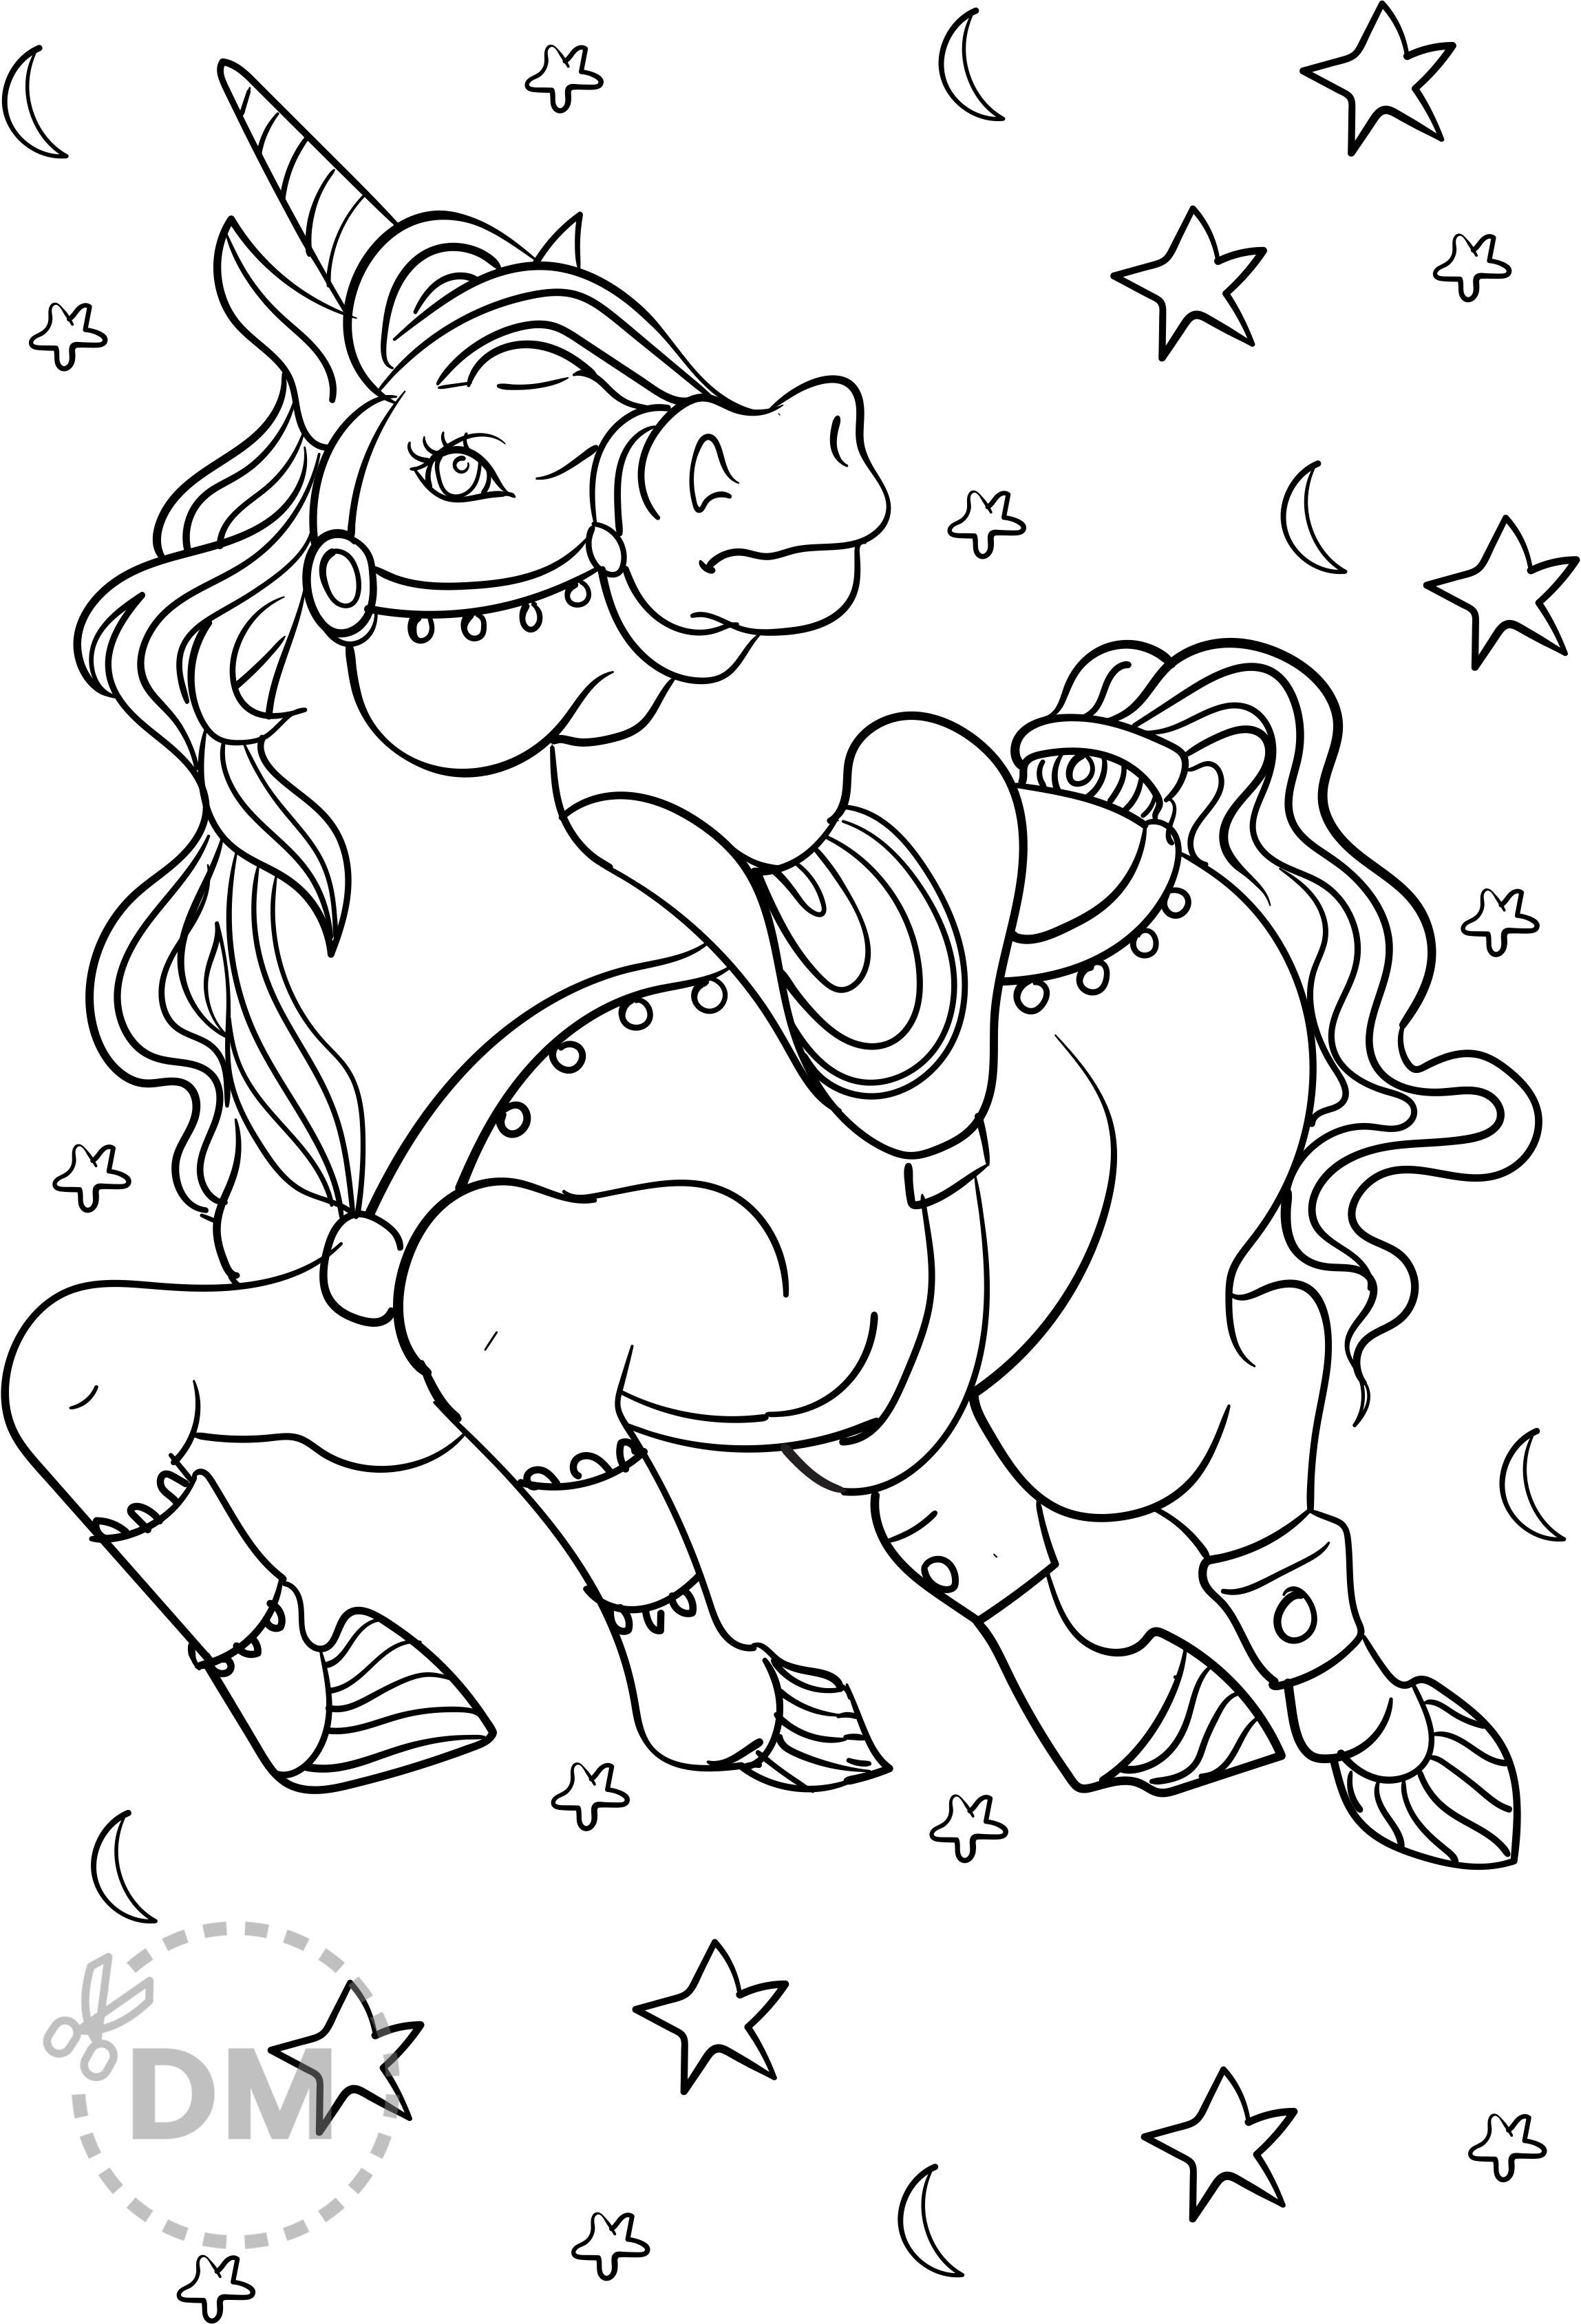 Small Unicorn Coloring Page To Color For Fun and Relaxation -  